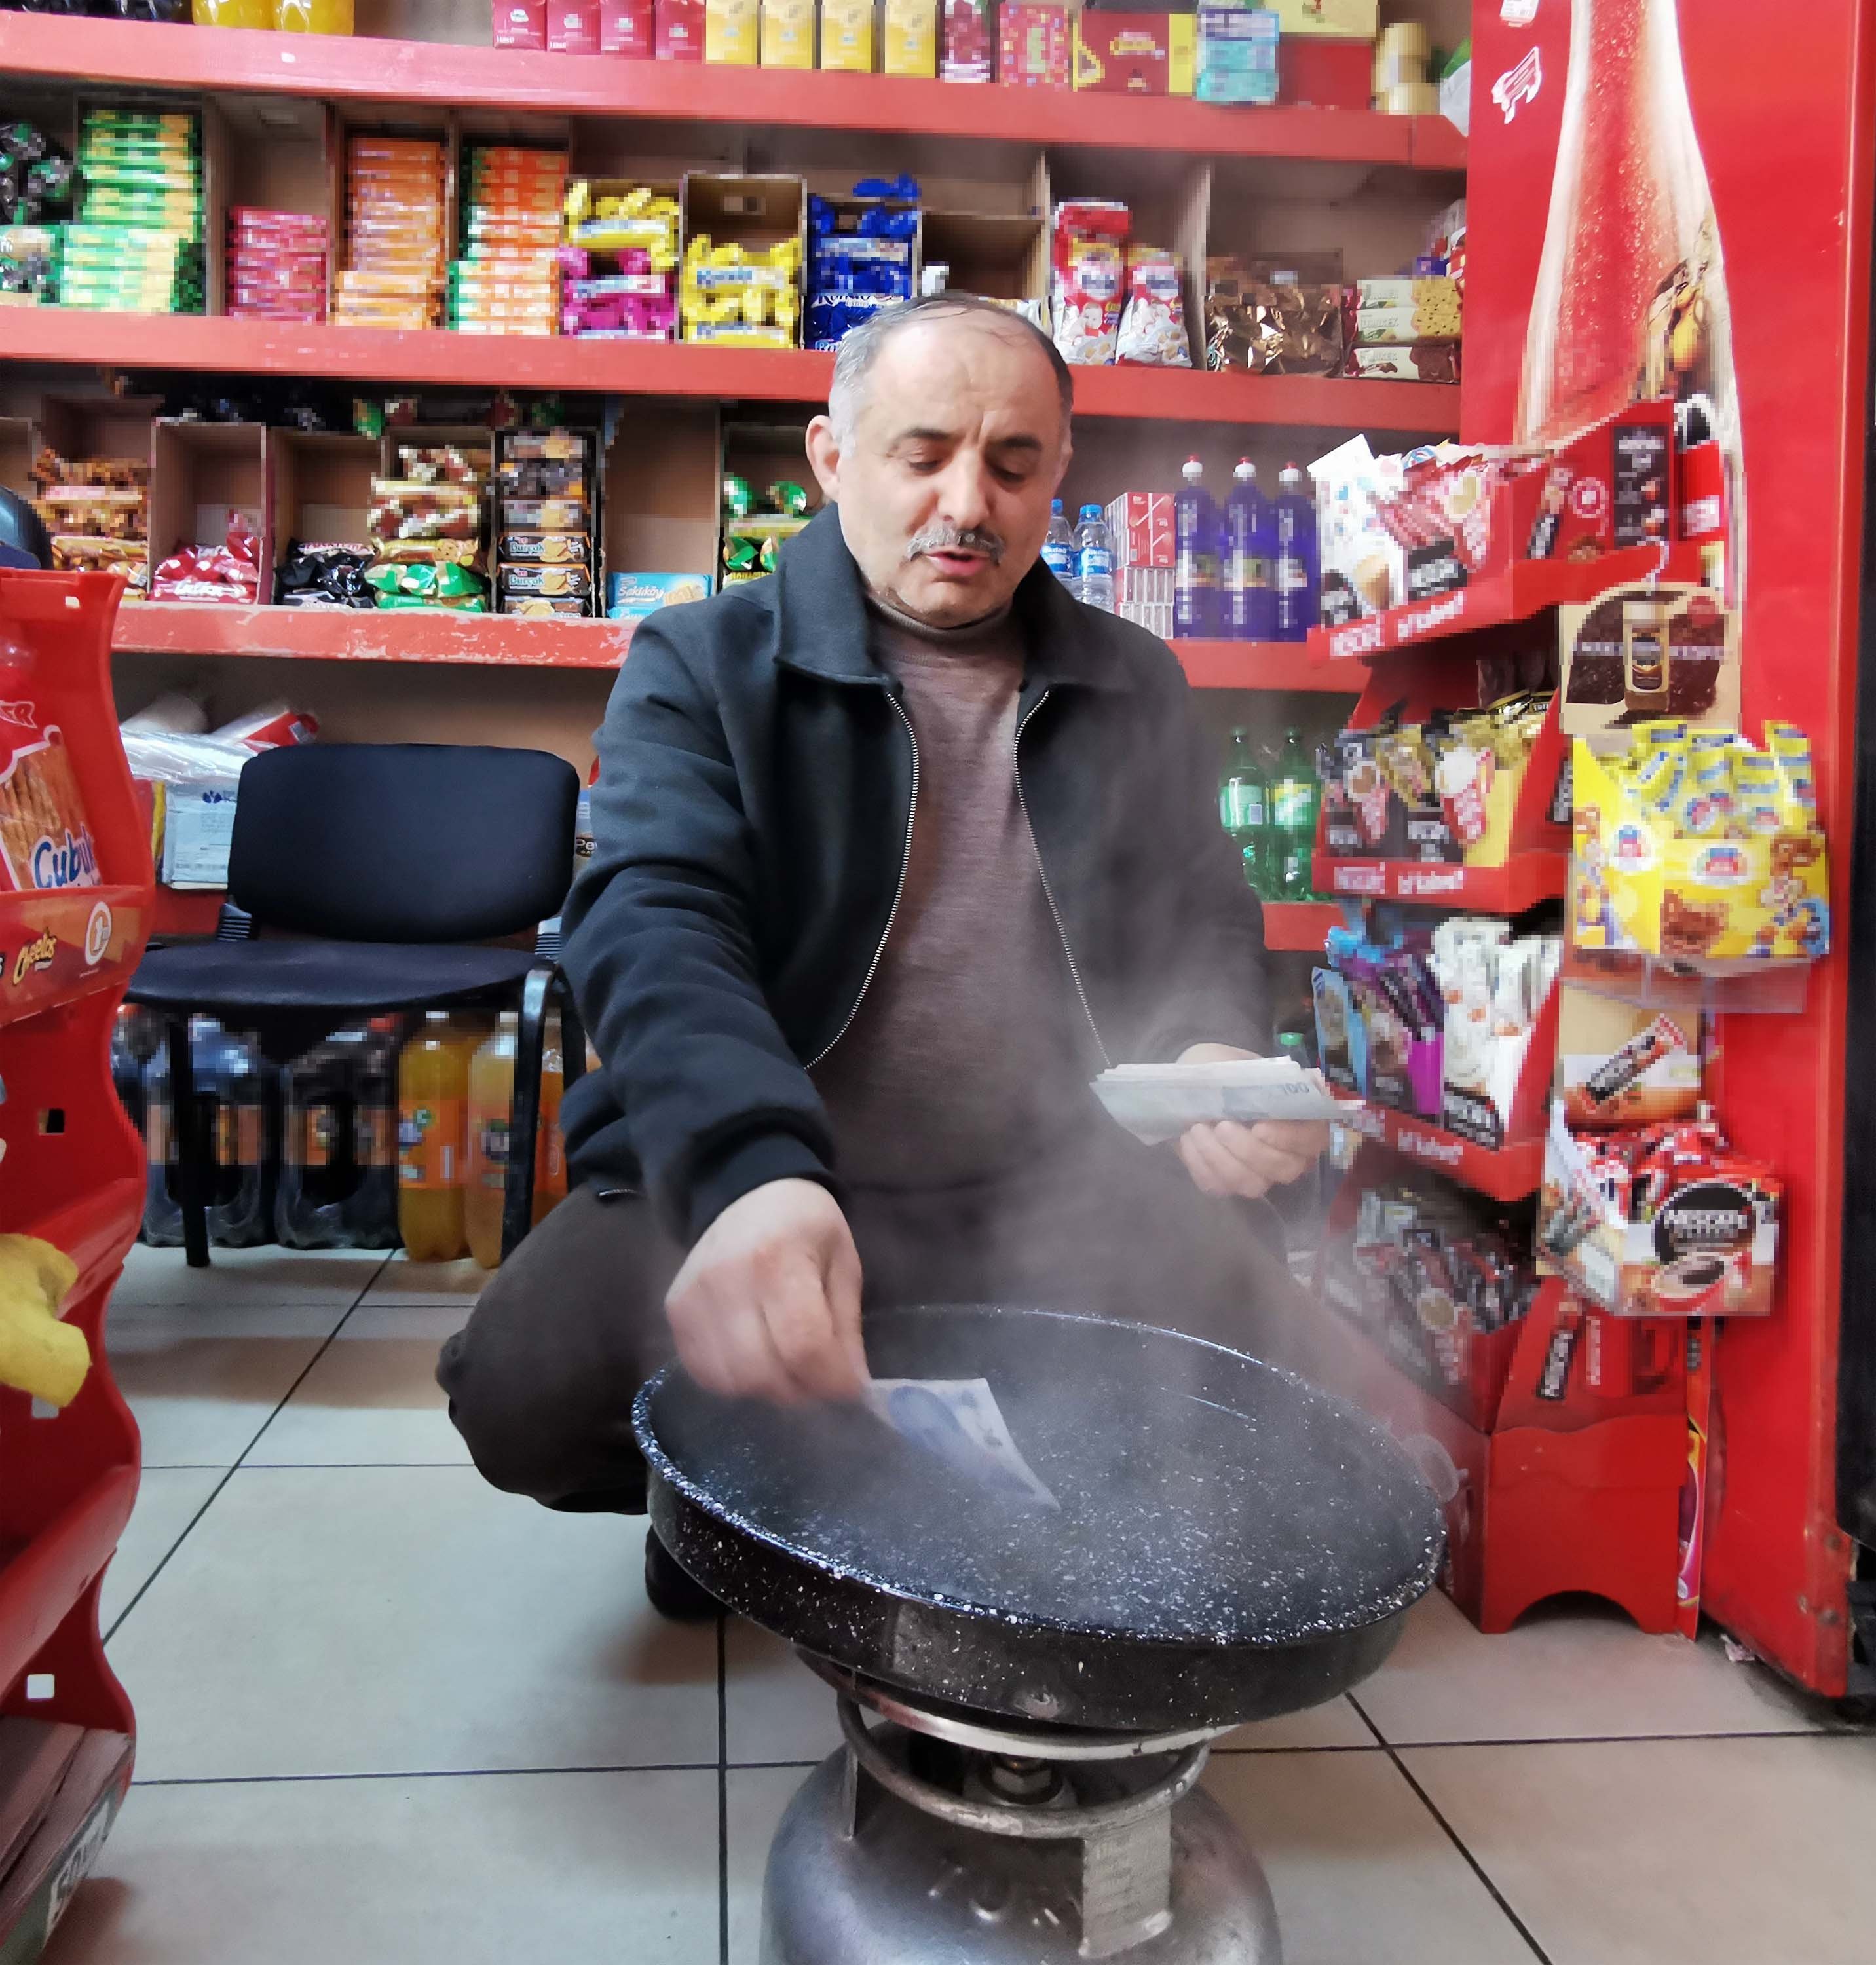 Orhan Sarı, a grocer from northern Ordu province, sterilizes the money he received from customers in an innovative way, May 4, 2020. (DHA Photo)